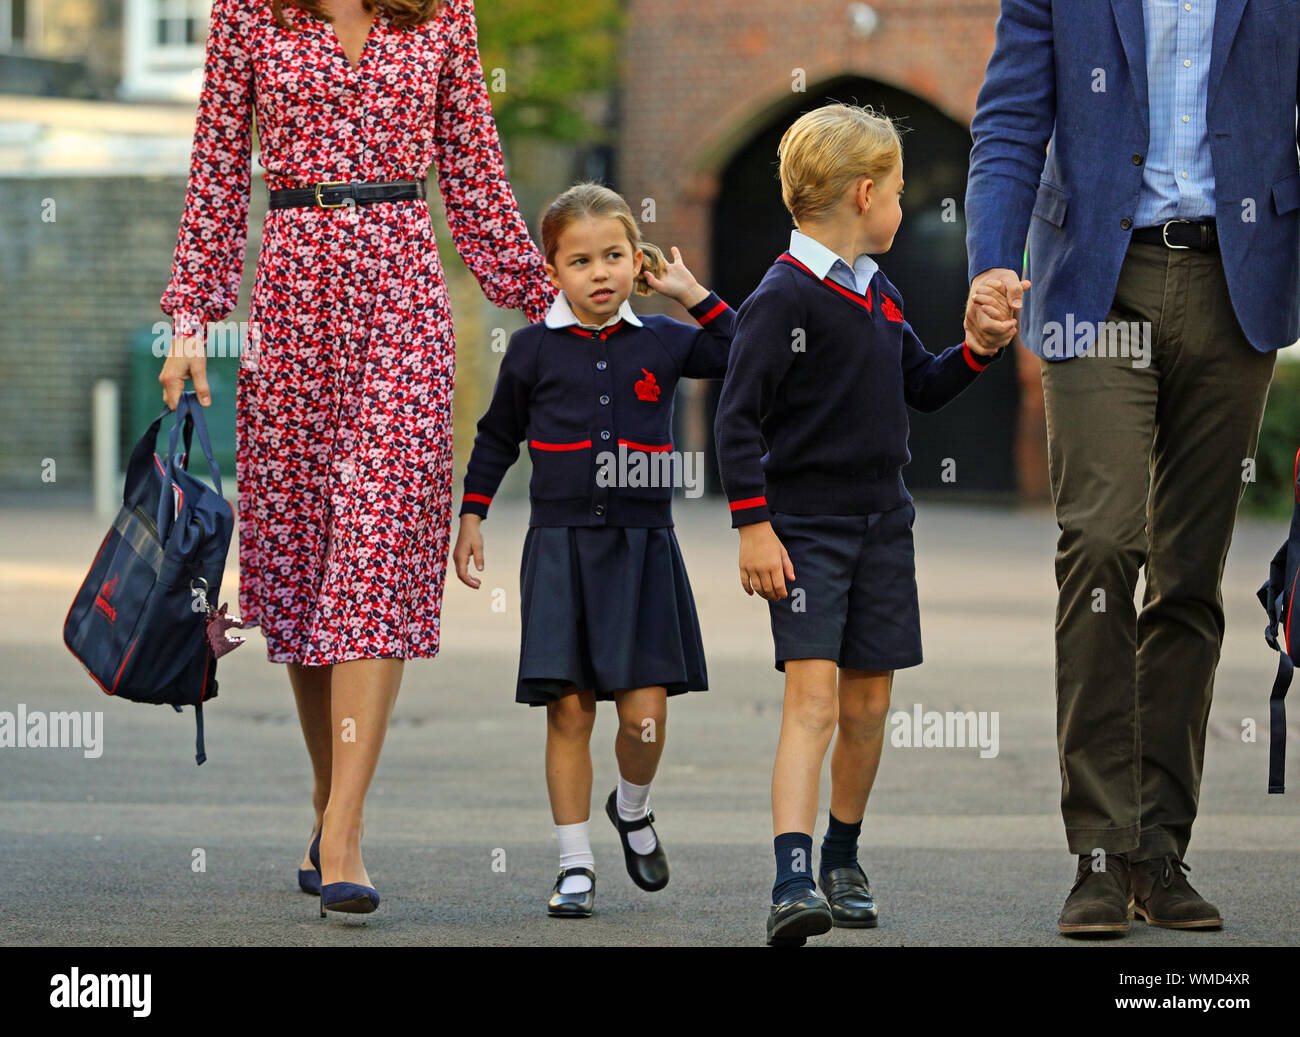 Princess Charlotte arrives for her first day at school, with her brother Prince George and her parents the Duke and Duchess of Cambridge, at Thomas's Battersea in London. Stock Photo